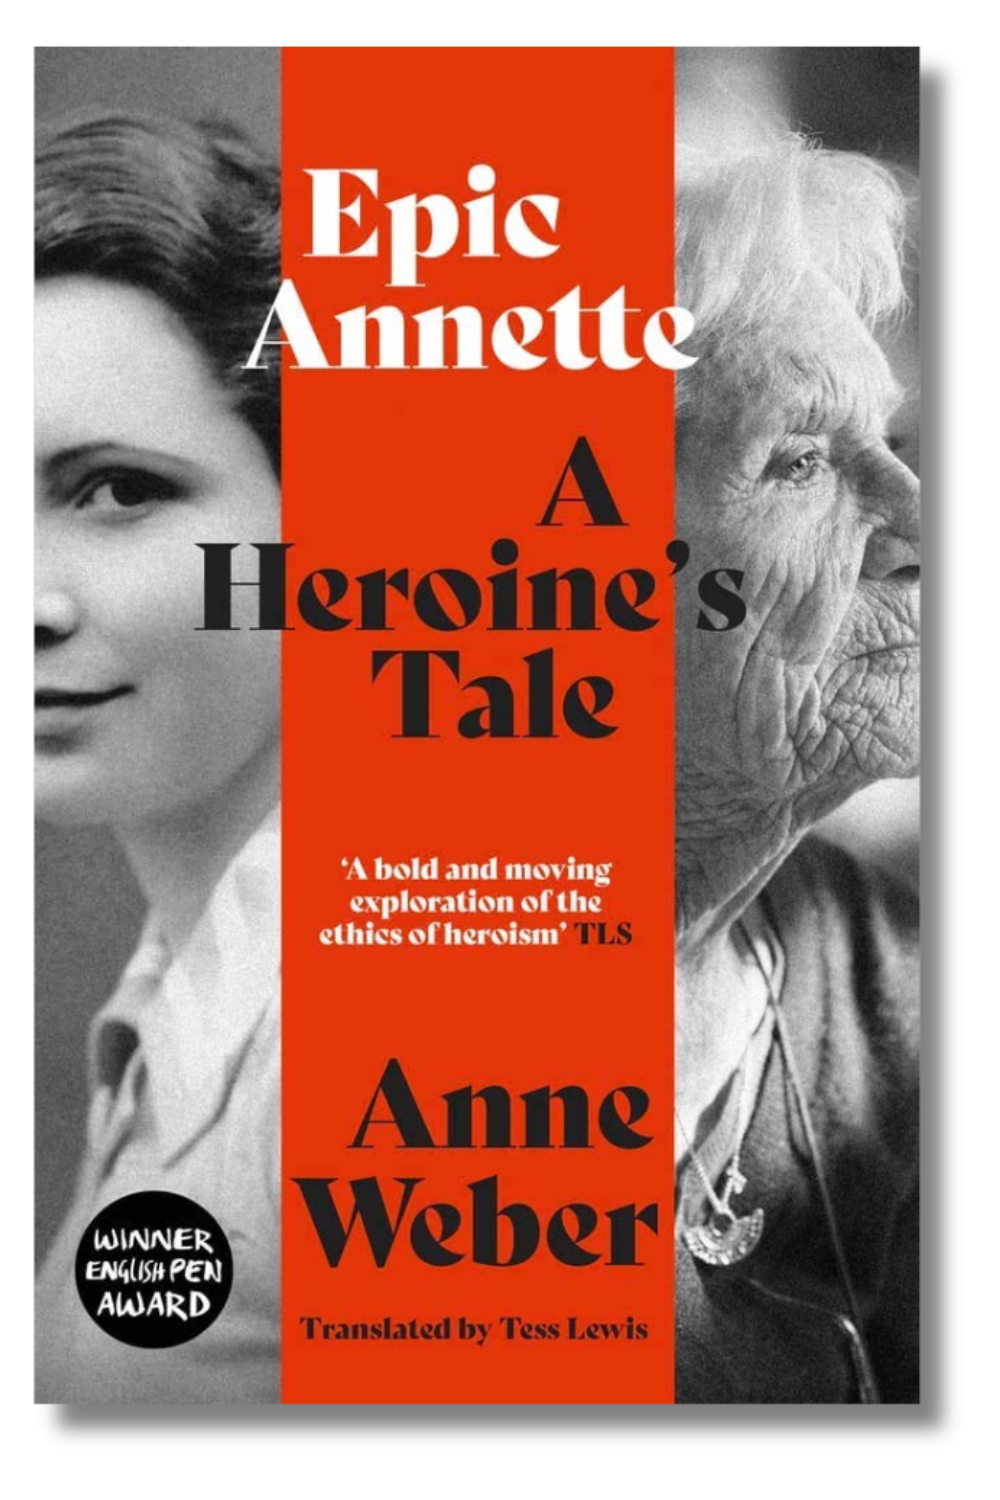 The cover of "Epic Annette: A Heroine's Tale" by Anne Weber, translated by Tess Lewis